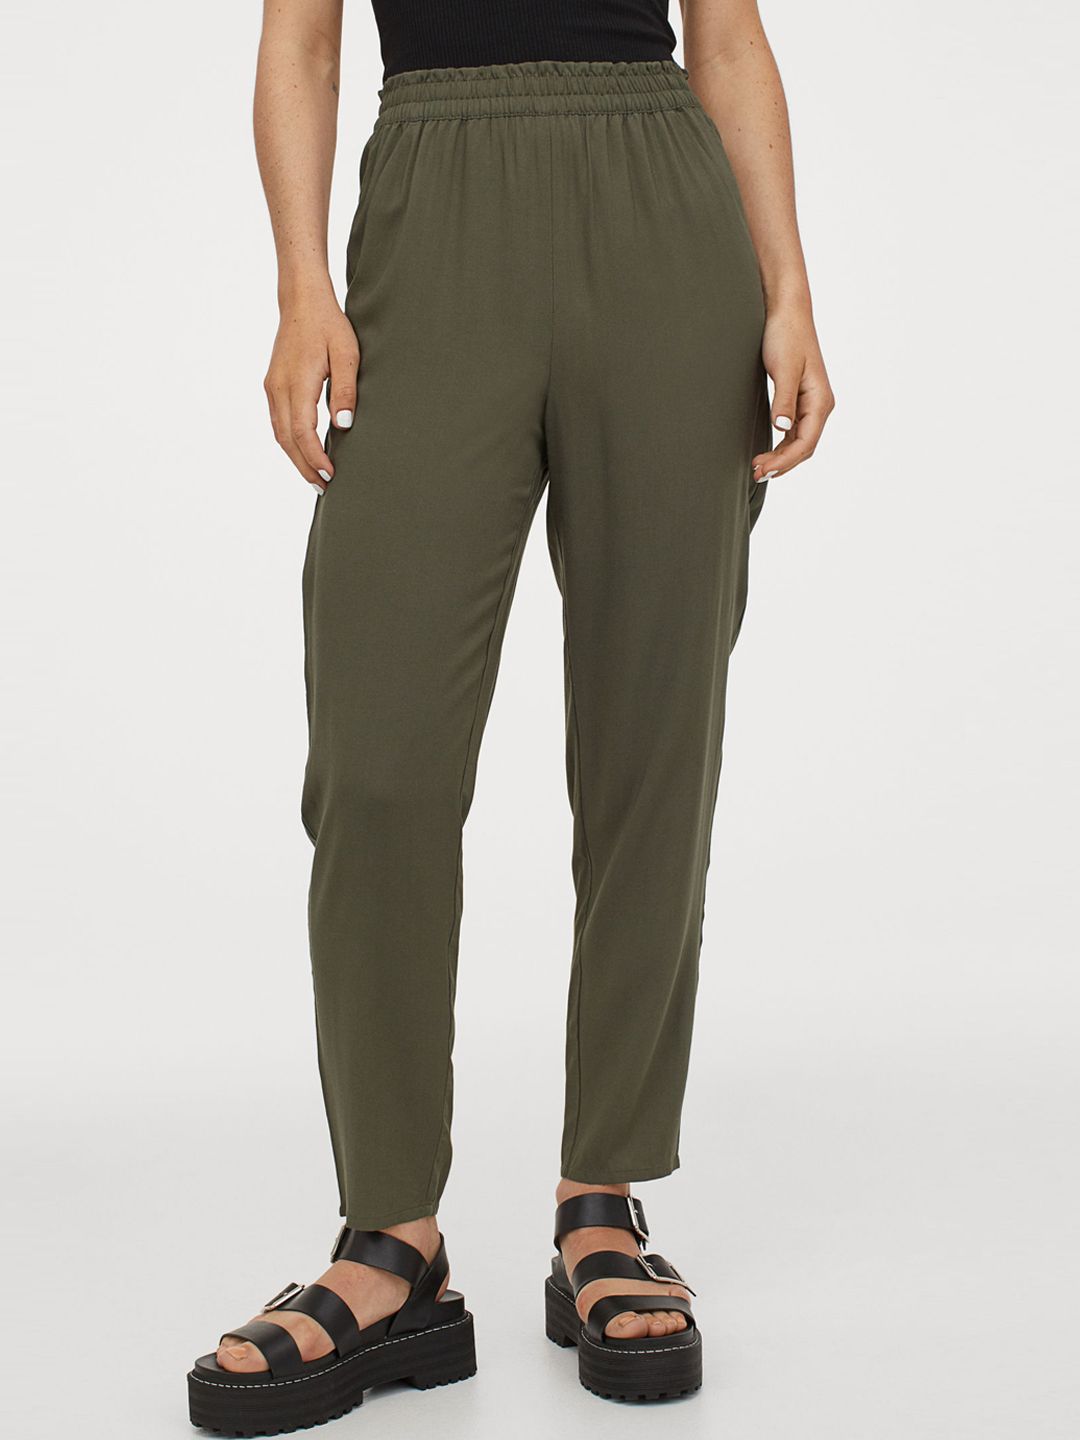 H&M Women Green Pull-On Trousers